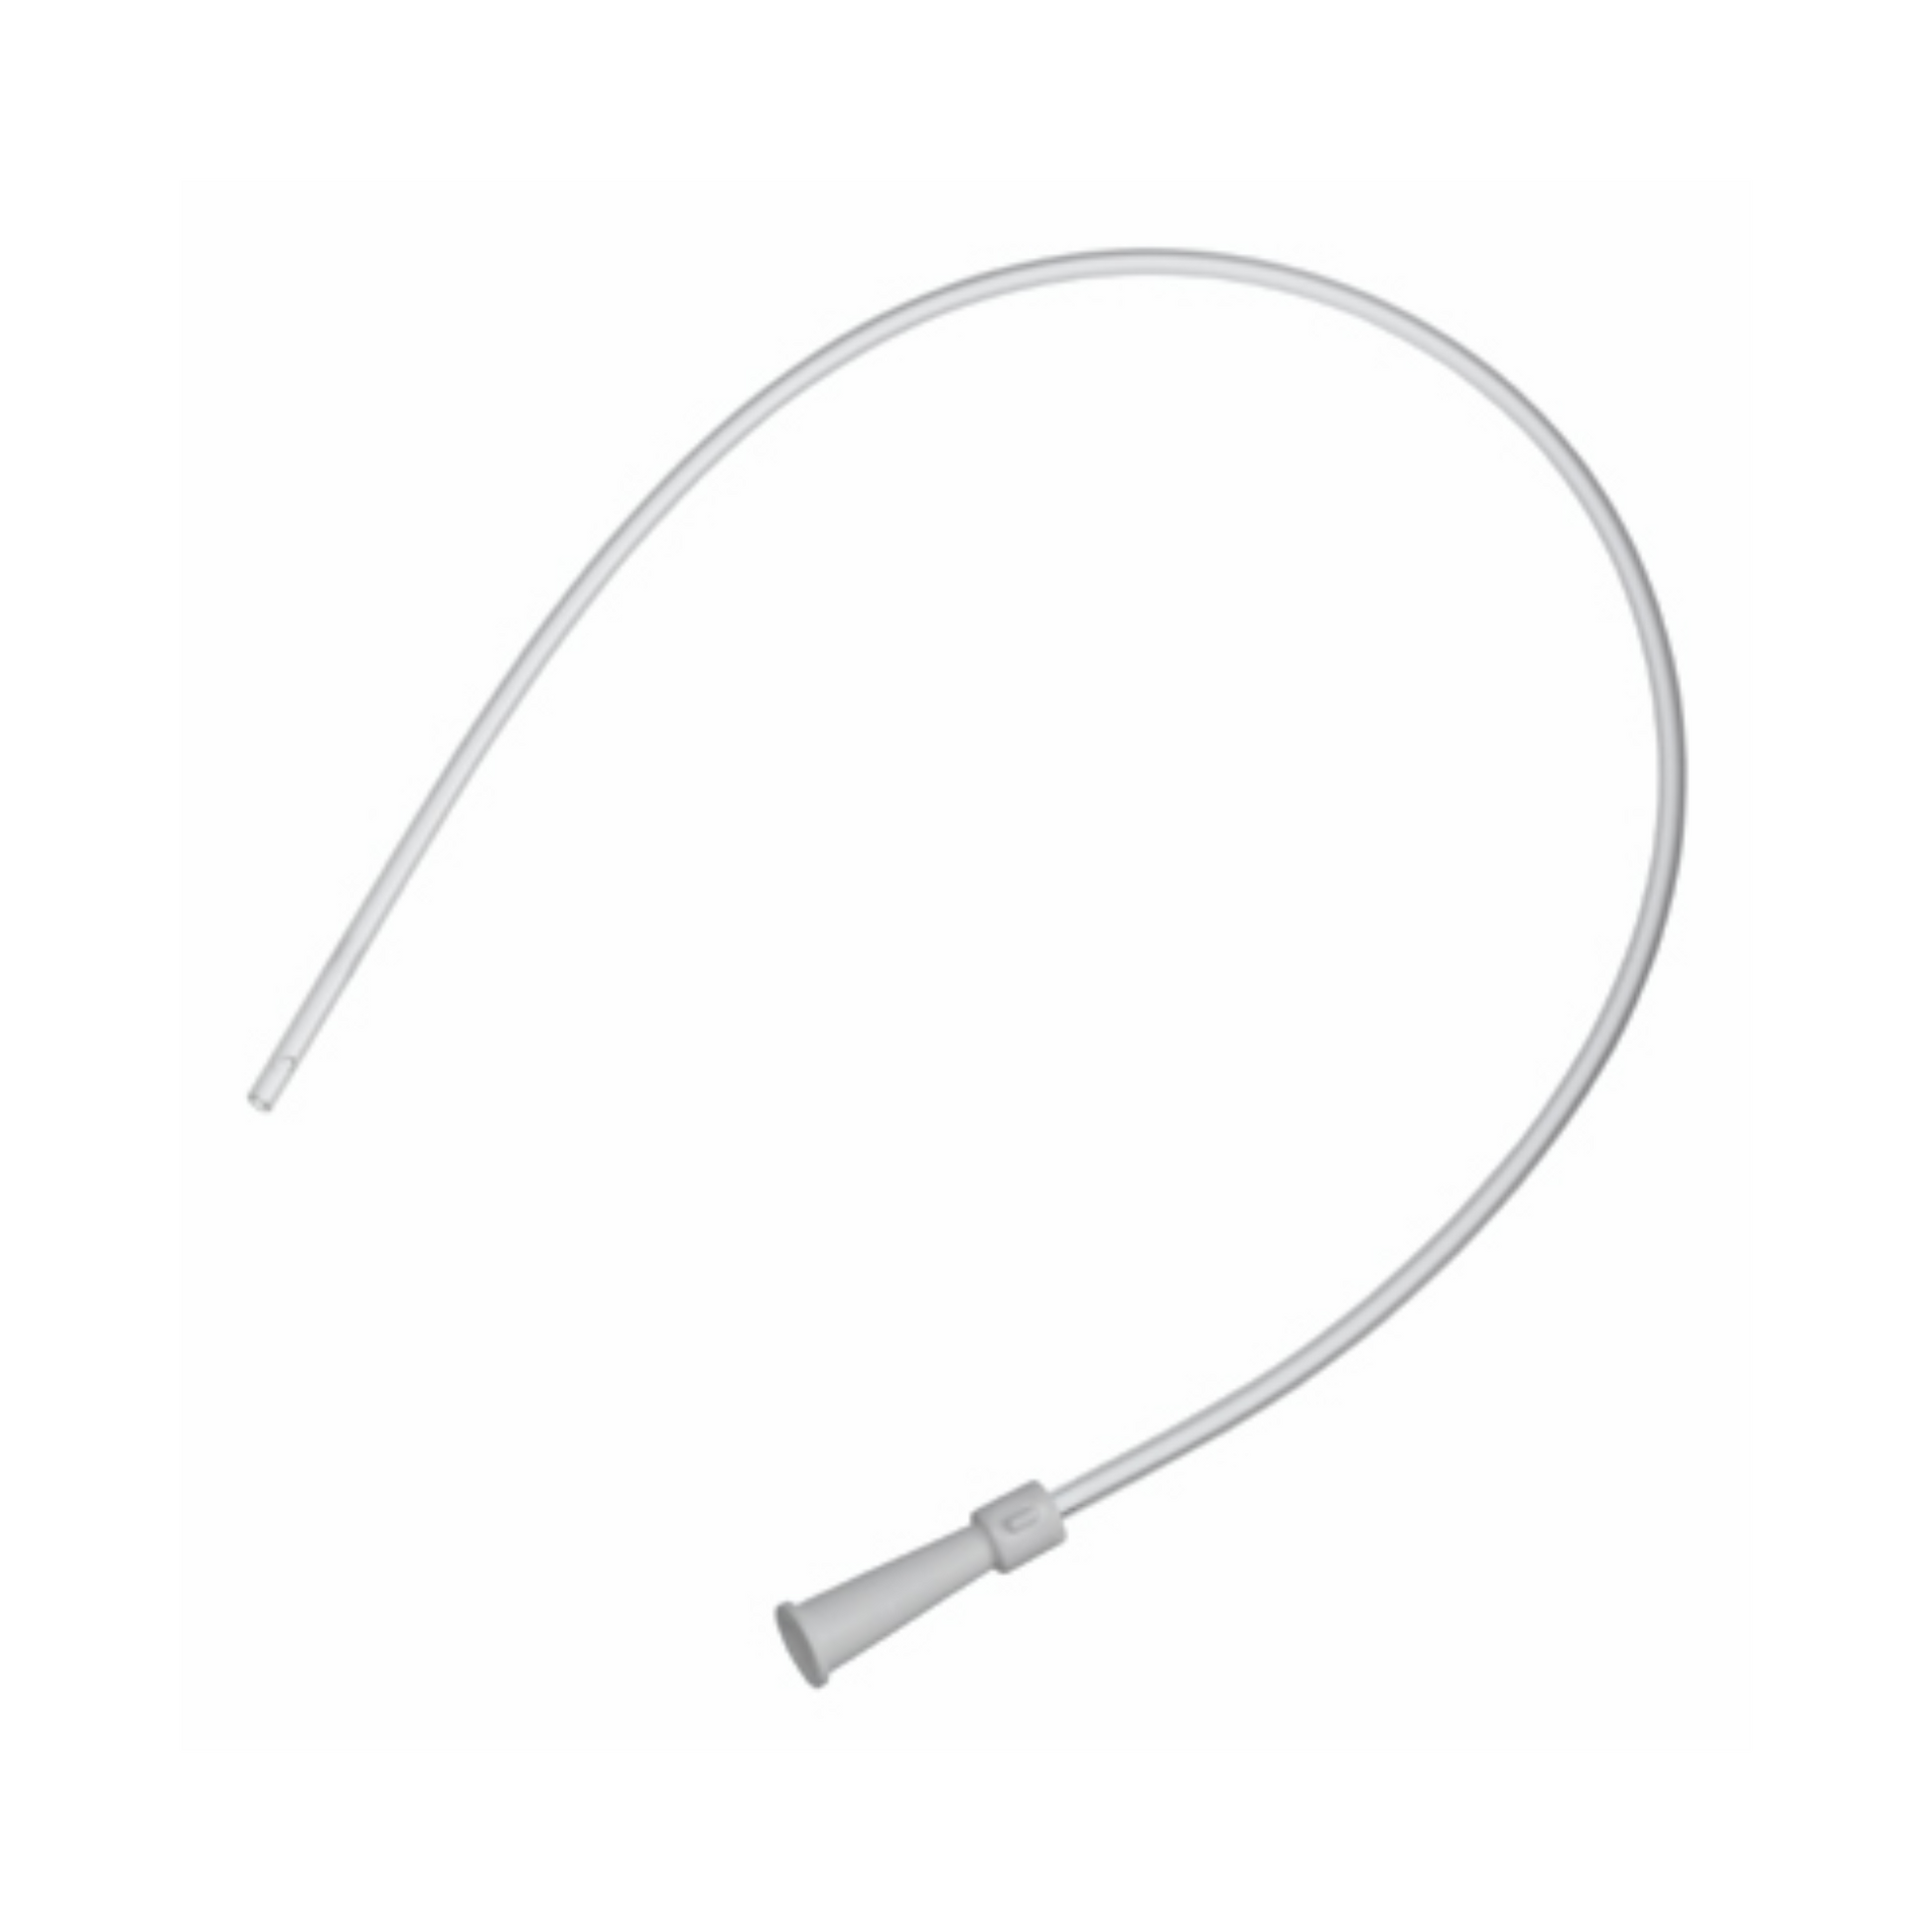 B. brown suction catheter type ideal, straight lace